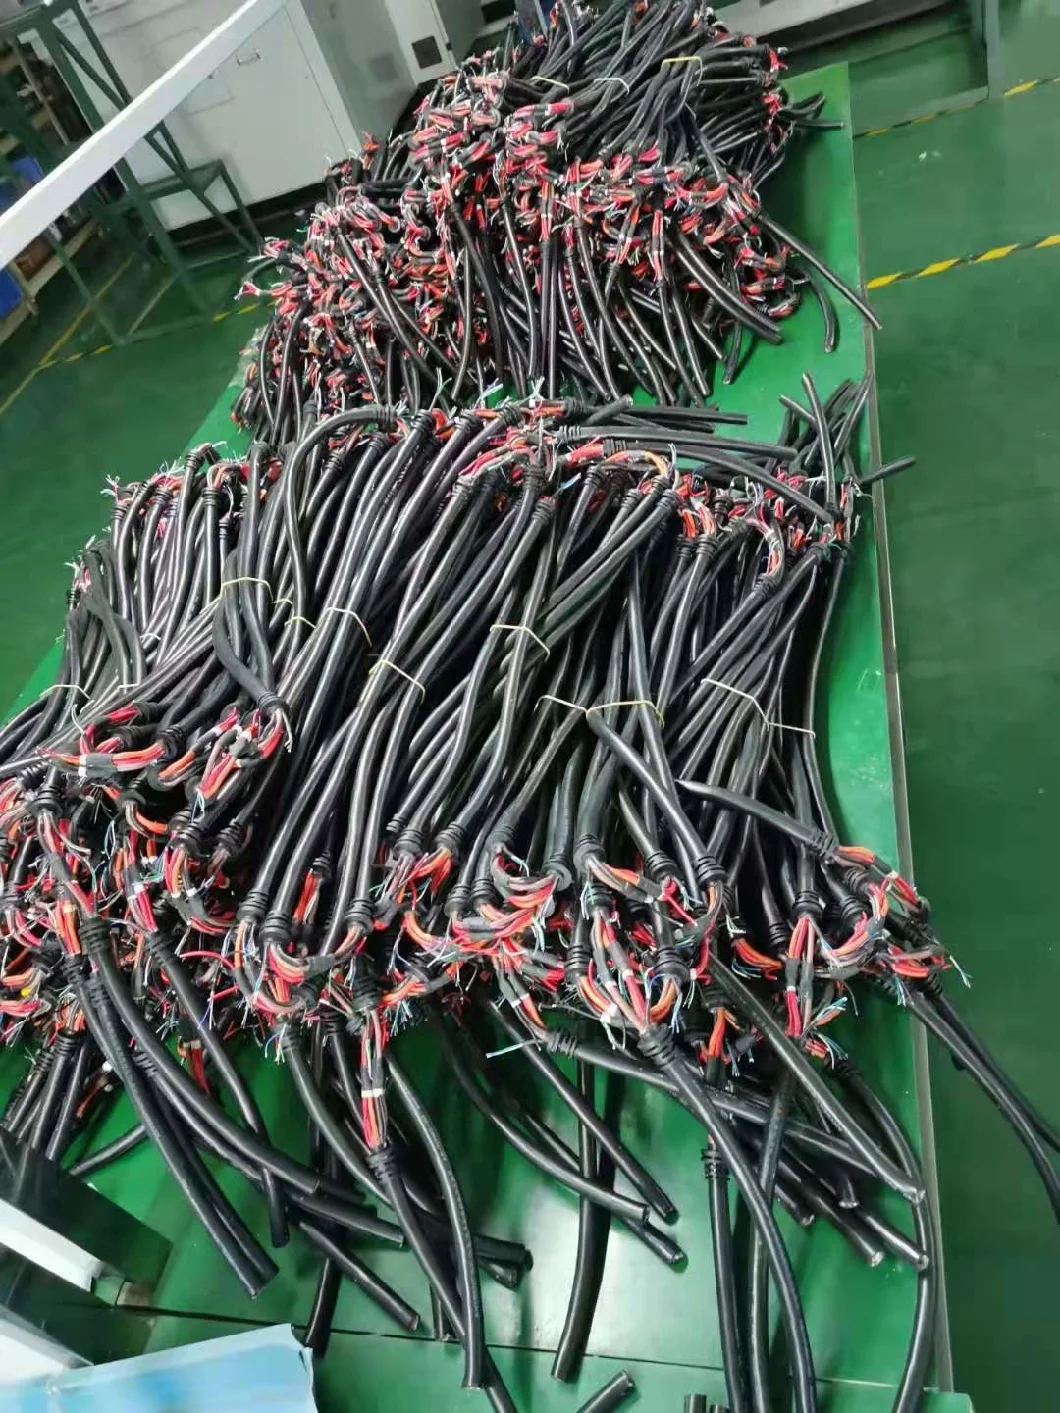 Custom Cable Assembly Wire Harness Power Cable with Molex Connector Jst Connector Te Connector, M8, M12